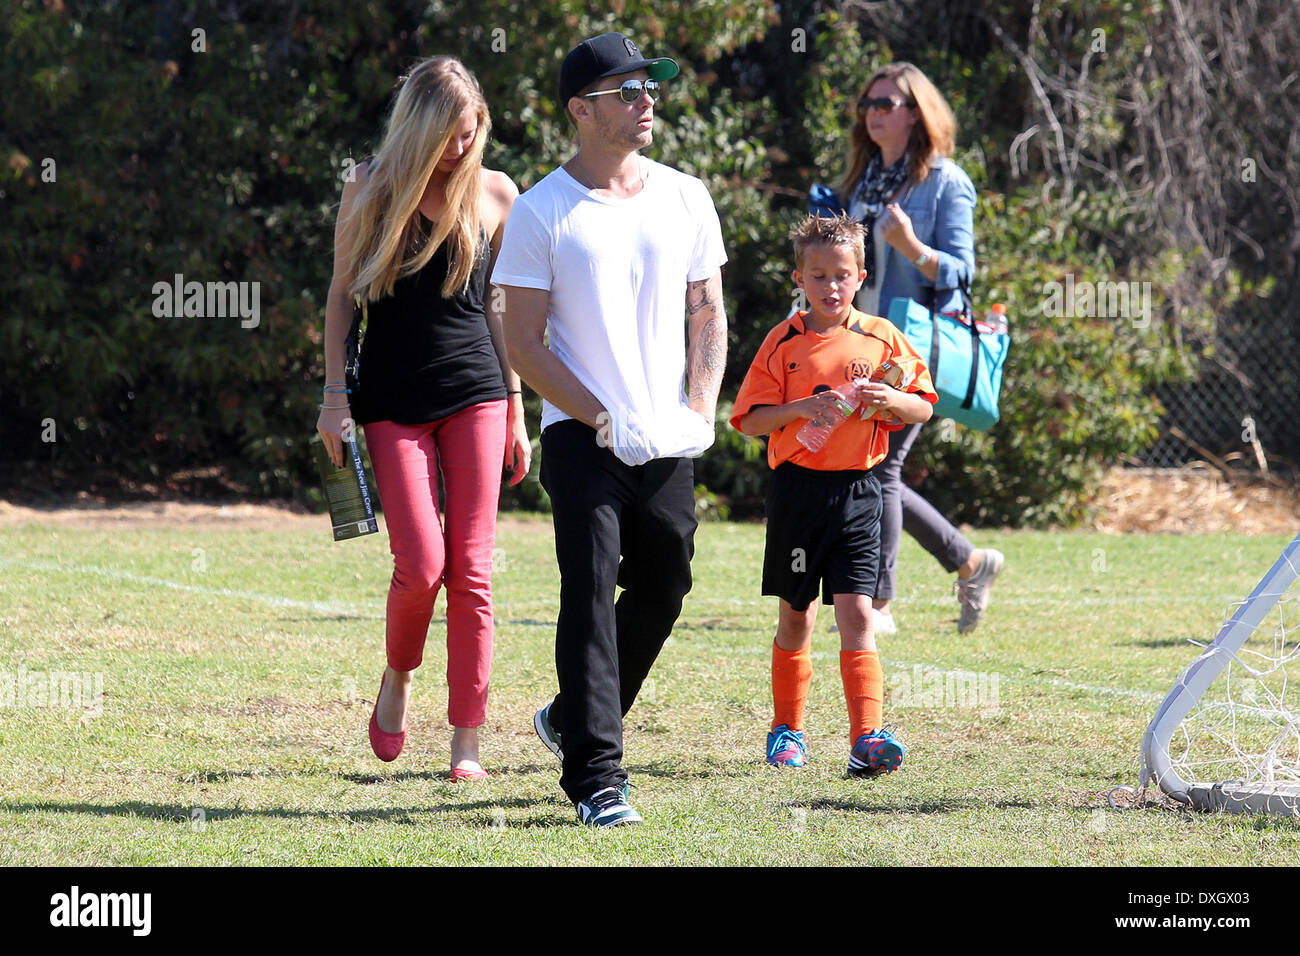 Paulina Slagter, Ryan Phillippe and Deacon Phillippe Ryan Phillippe at a park in Brentwood with his girlfriend to watch his son's soccer game Los Angeles, California - 03.11.12 Featuring: Paulina Slagter,Ryan Phillippe and Deacon Phillippe When: 03 Nov 2012 Stock Photo